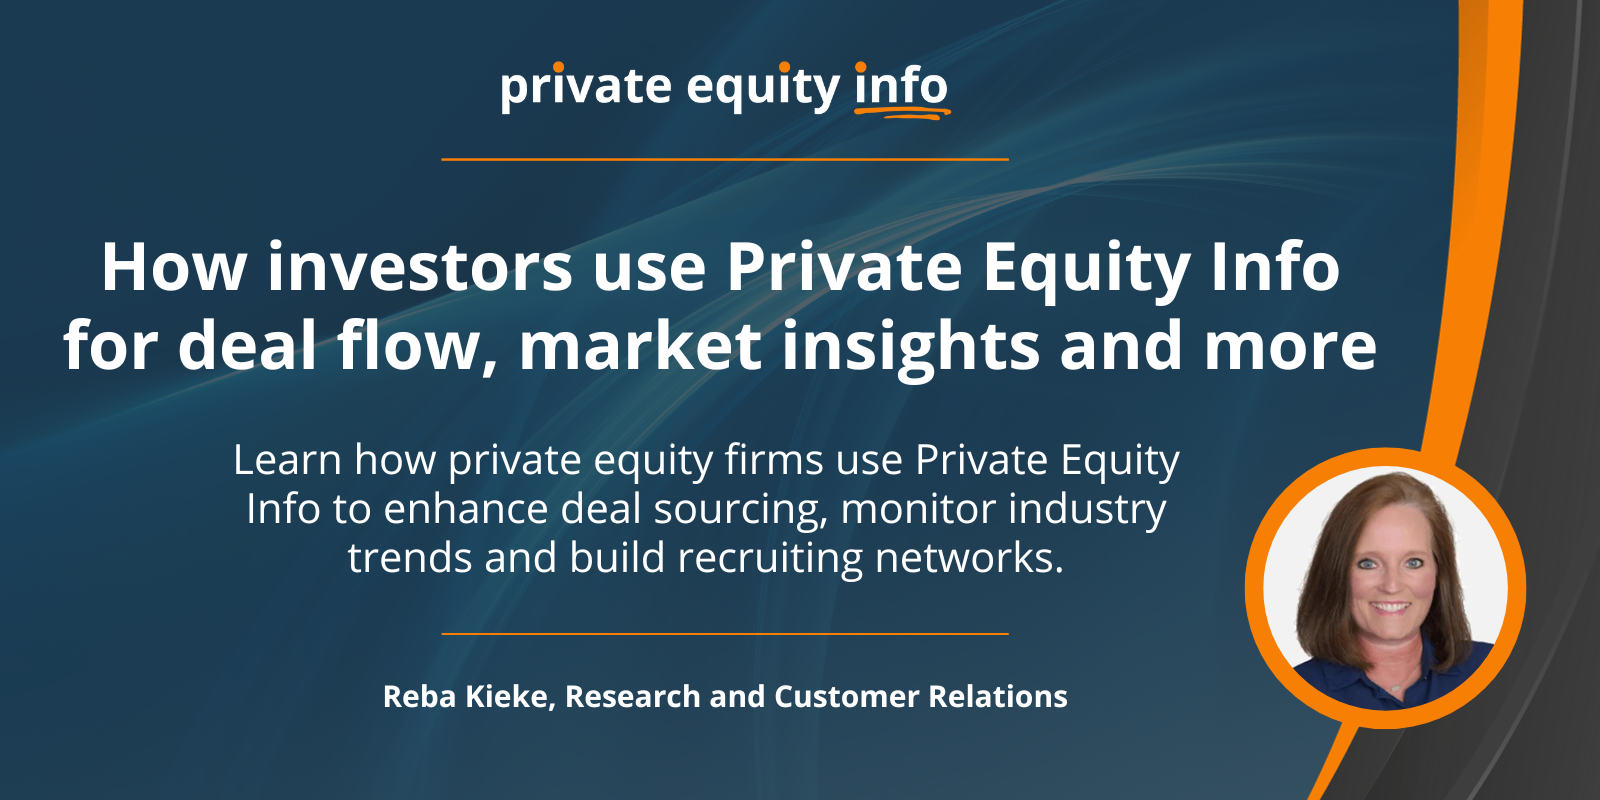 Learn how private equity firms use Private Equity Info to enhance deal sourcing, monitor industry trends and build recruiting networks.